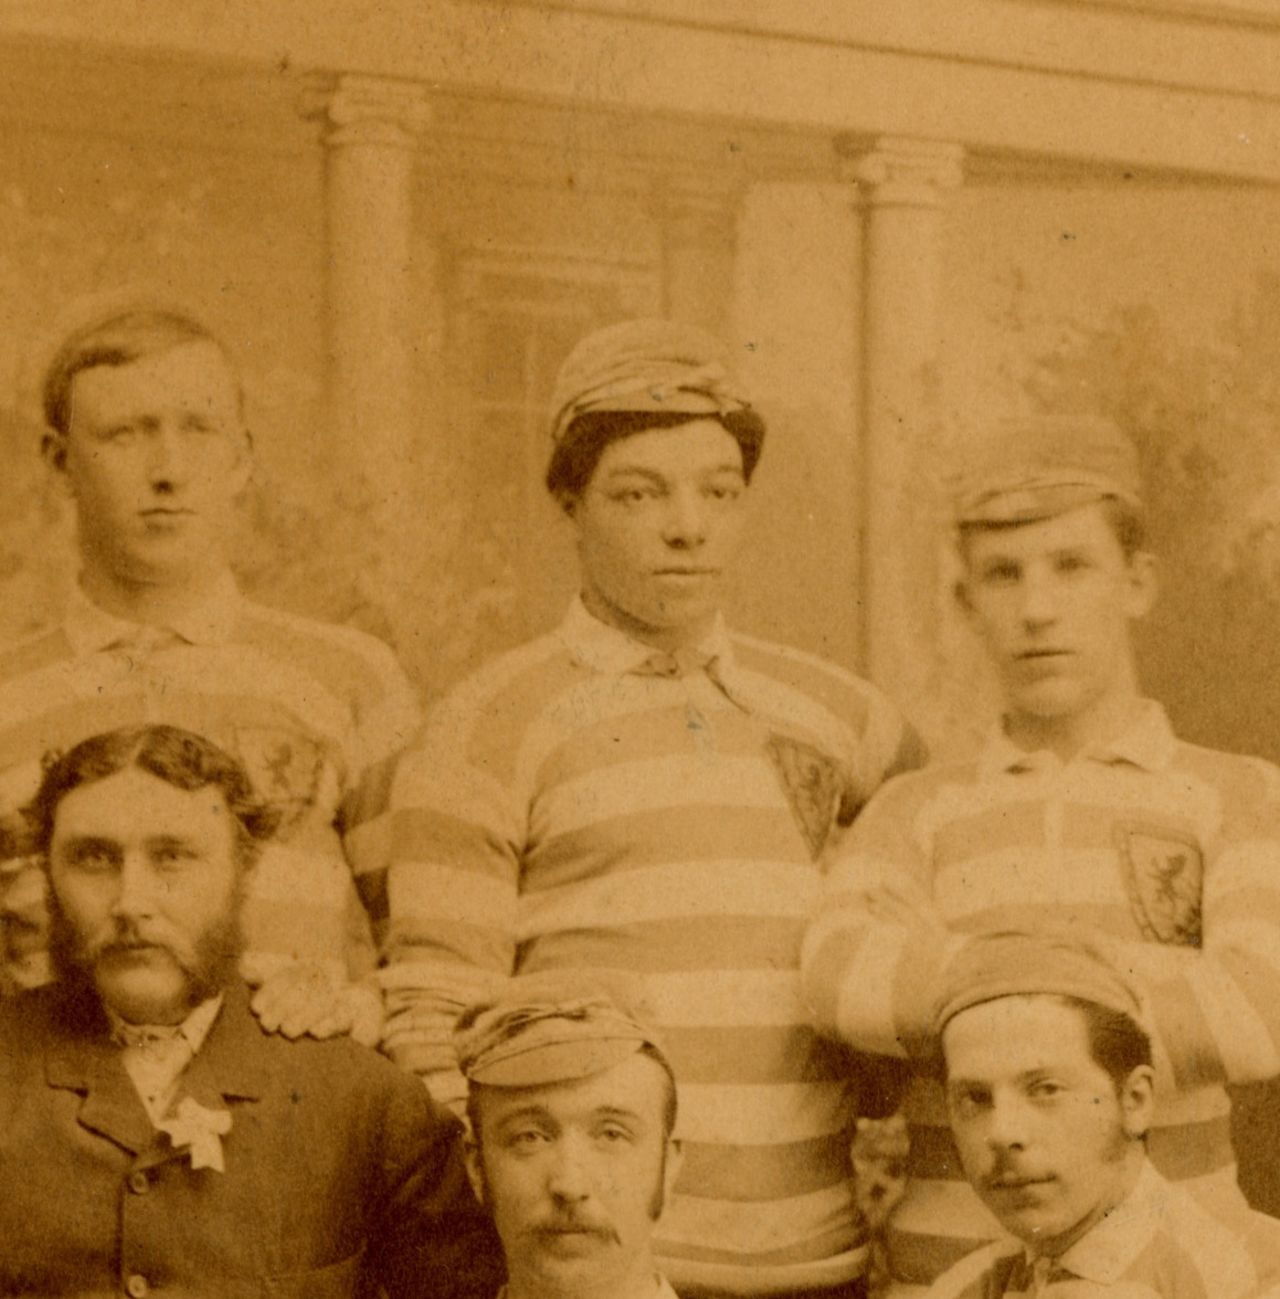 Watson is pictured here alongside his international teammates in 1882. He was a key part of the Scotland team which pioneered a short passing style of football.